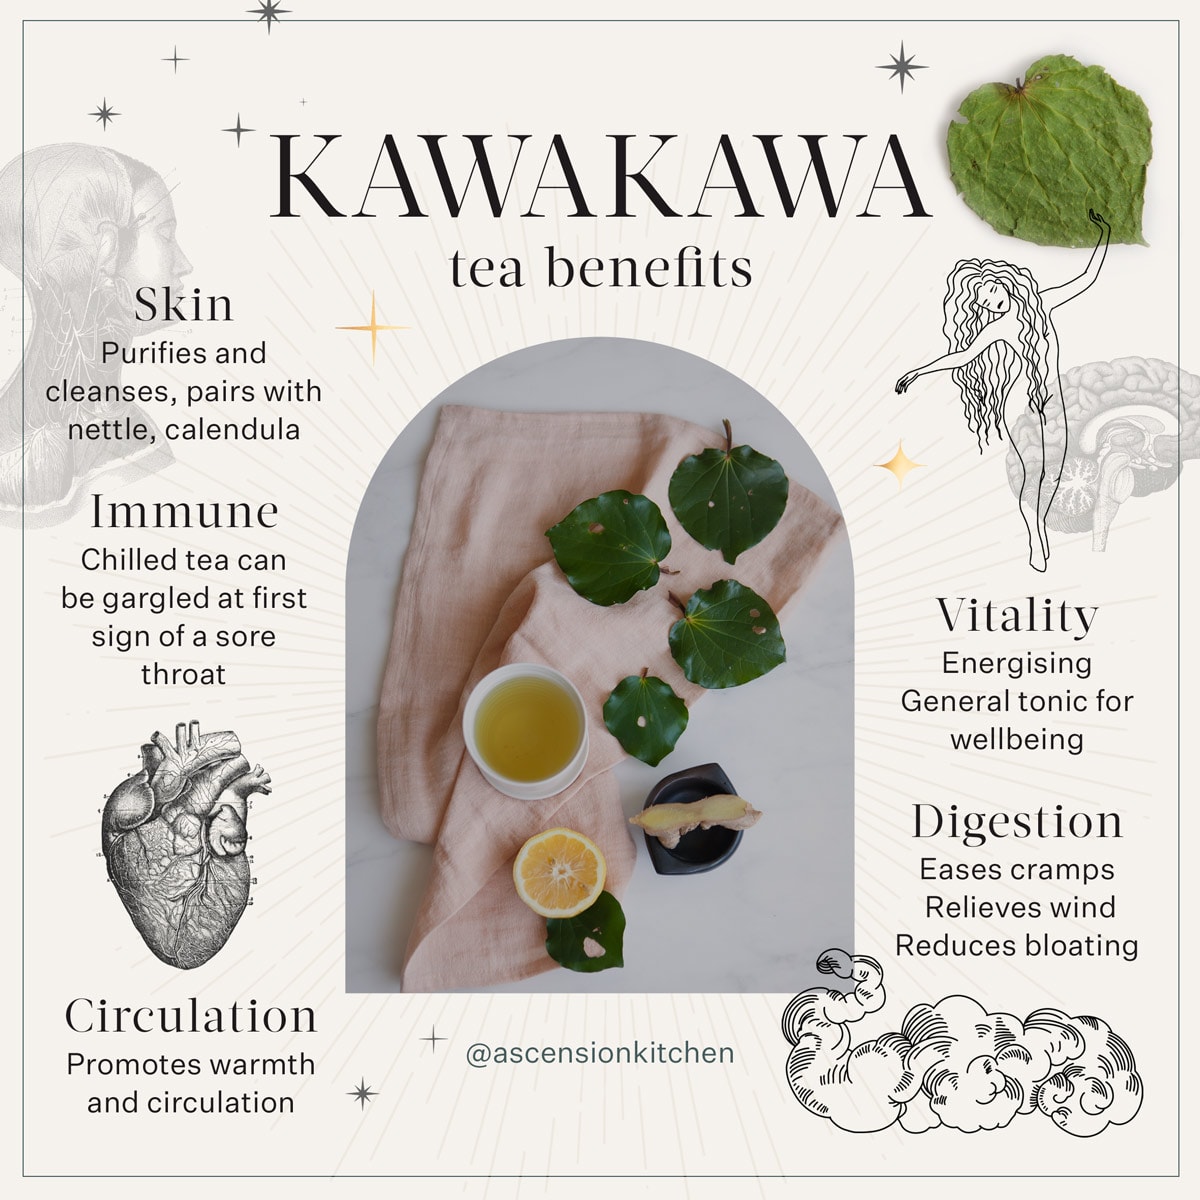 Infographic of the health benefits of kawakawa tea. Key points covered are skin, immune, circulation, digestion and vitality.